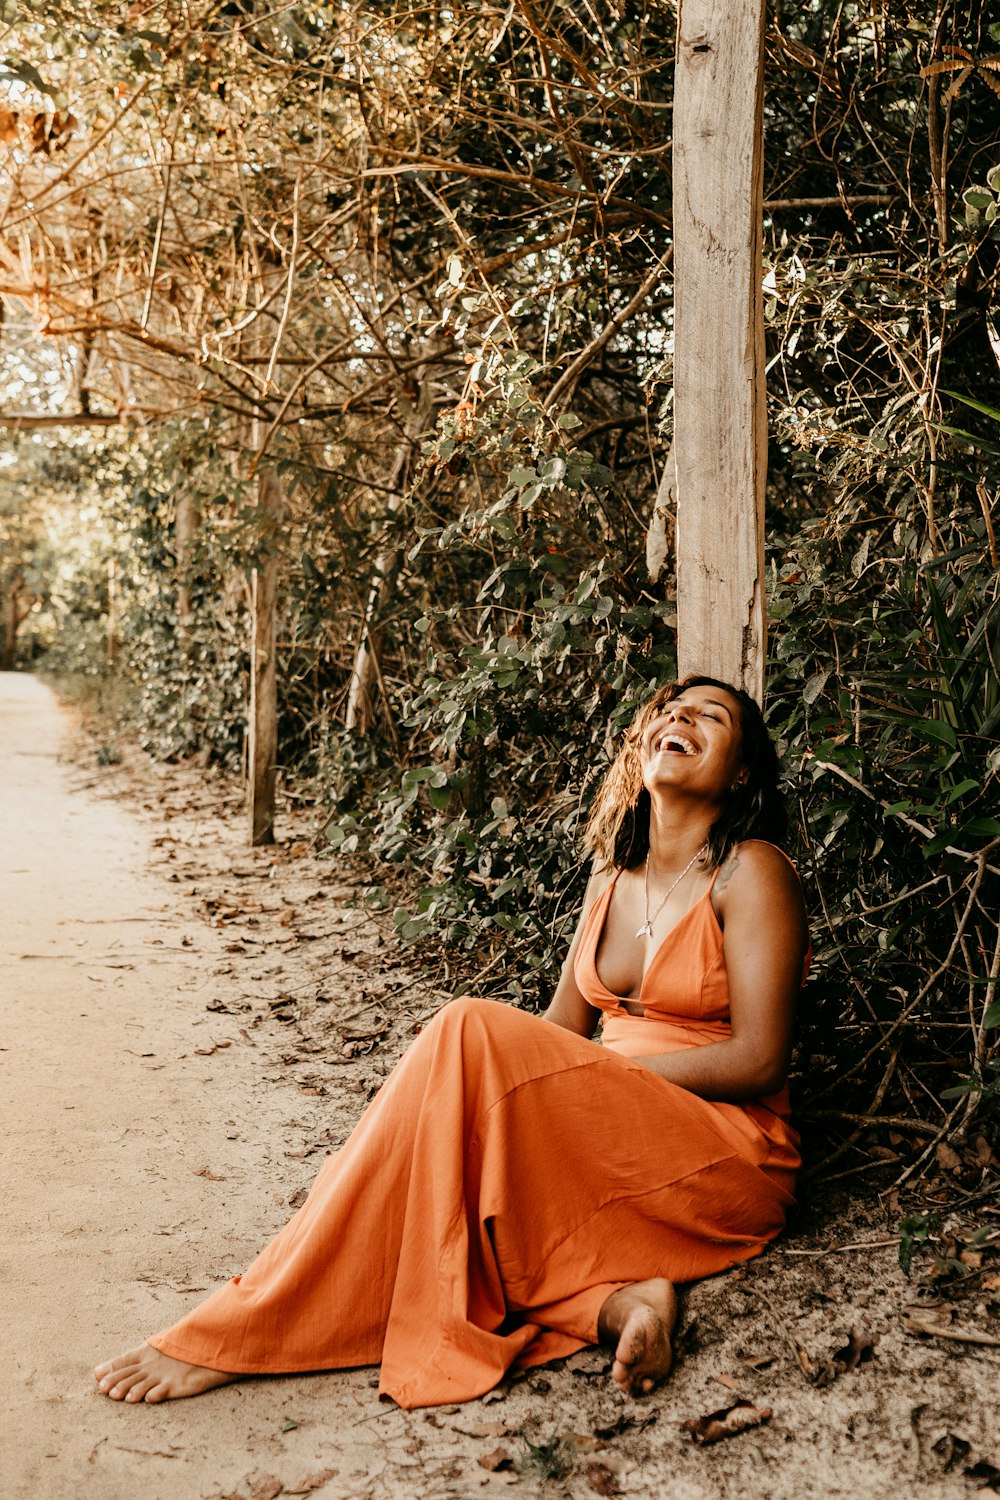 barefooted woman wearing orange spaghetti strap dress laughing while sitting on pathway surrounded with green trees